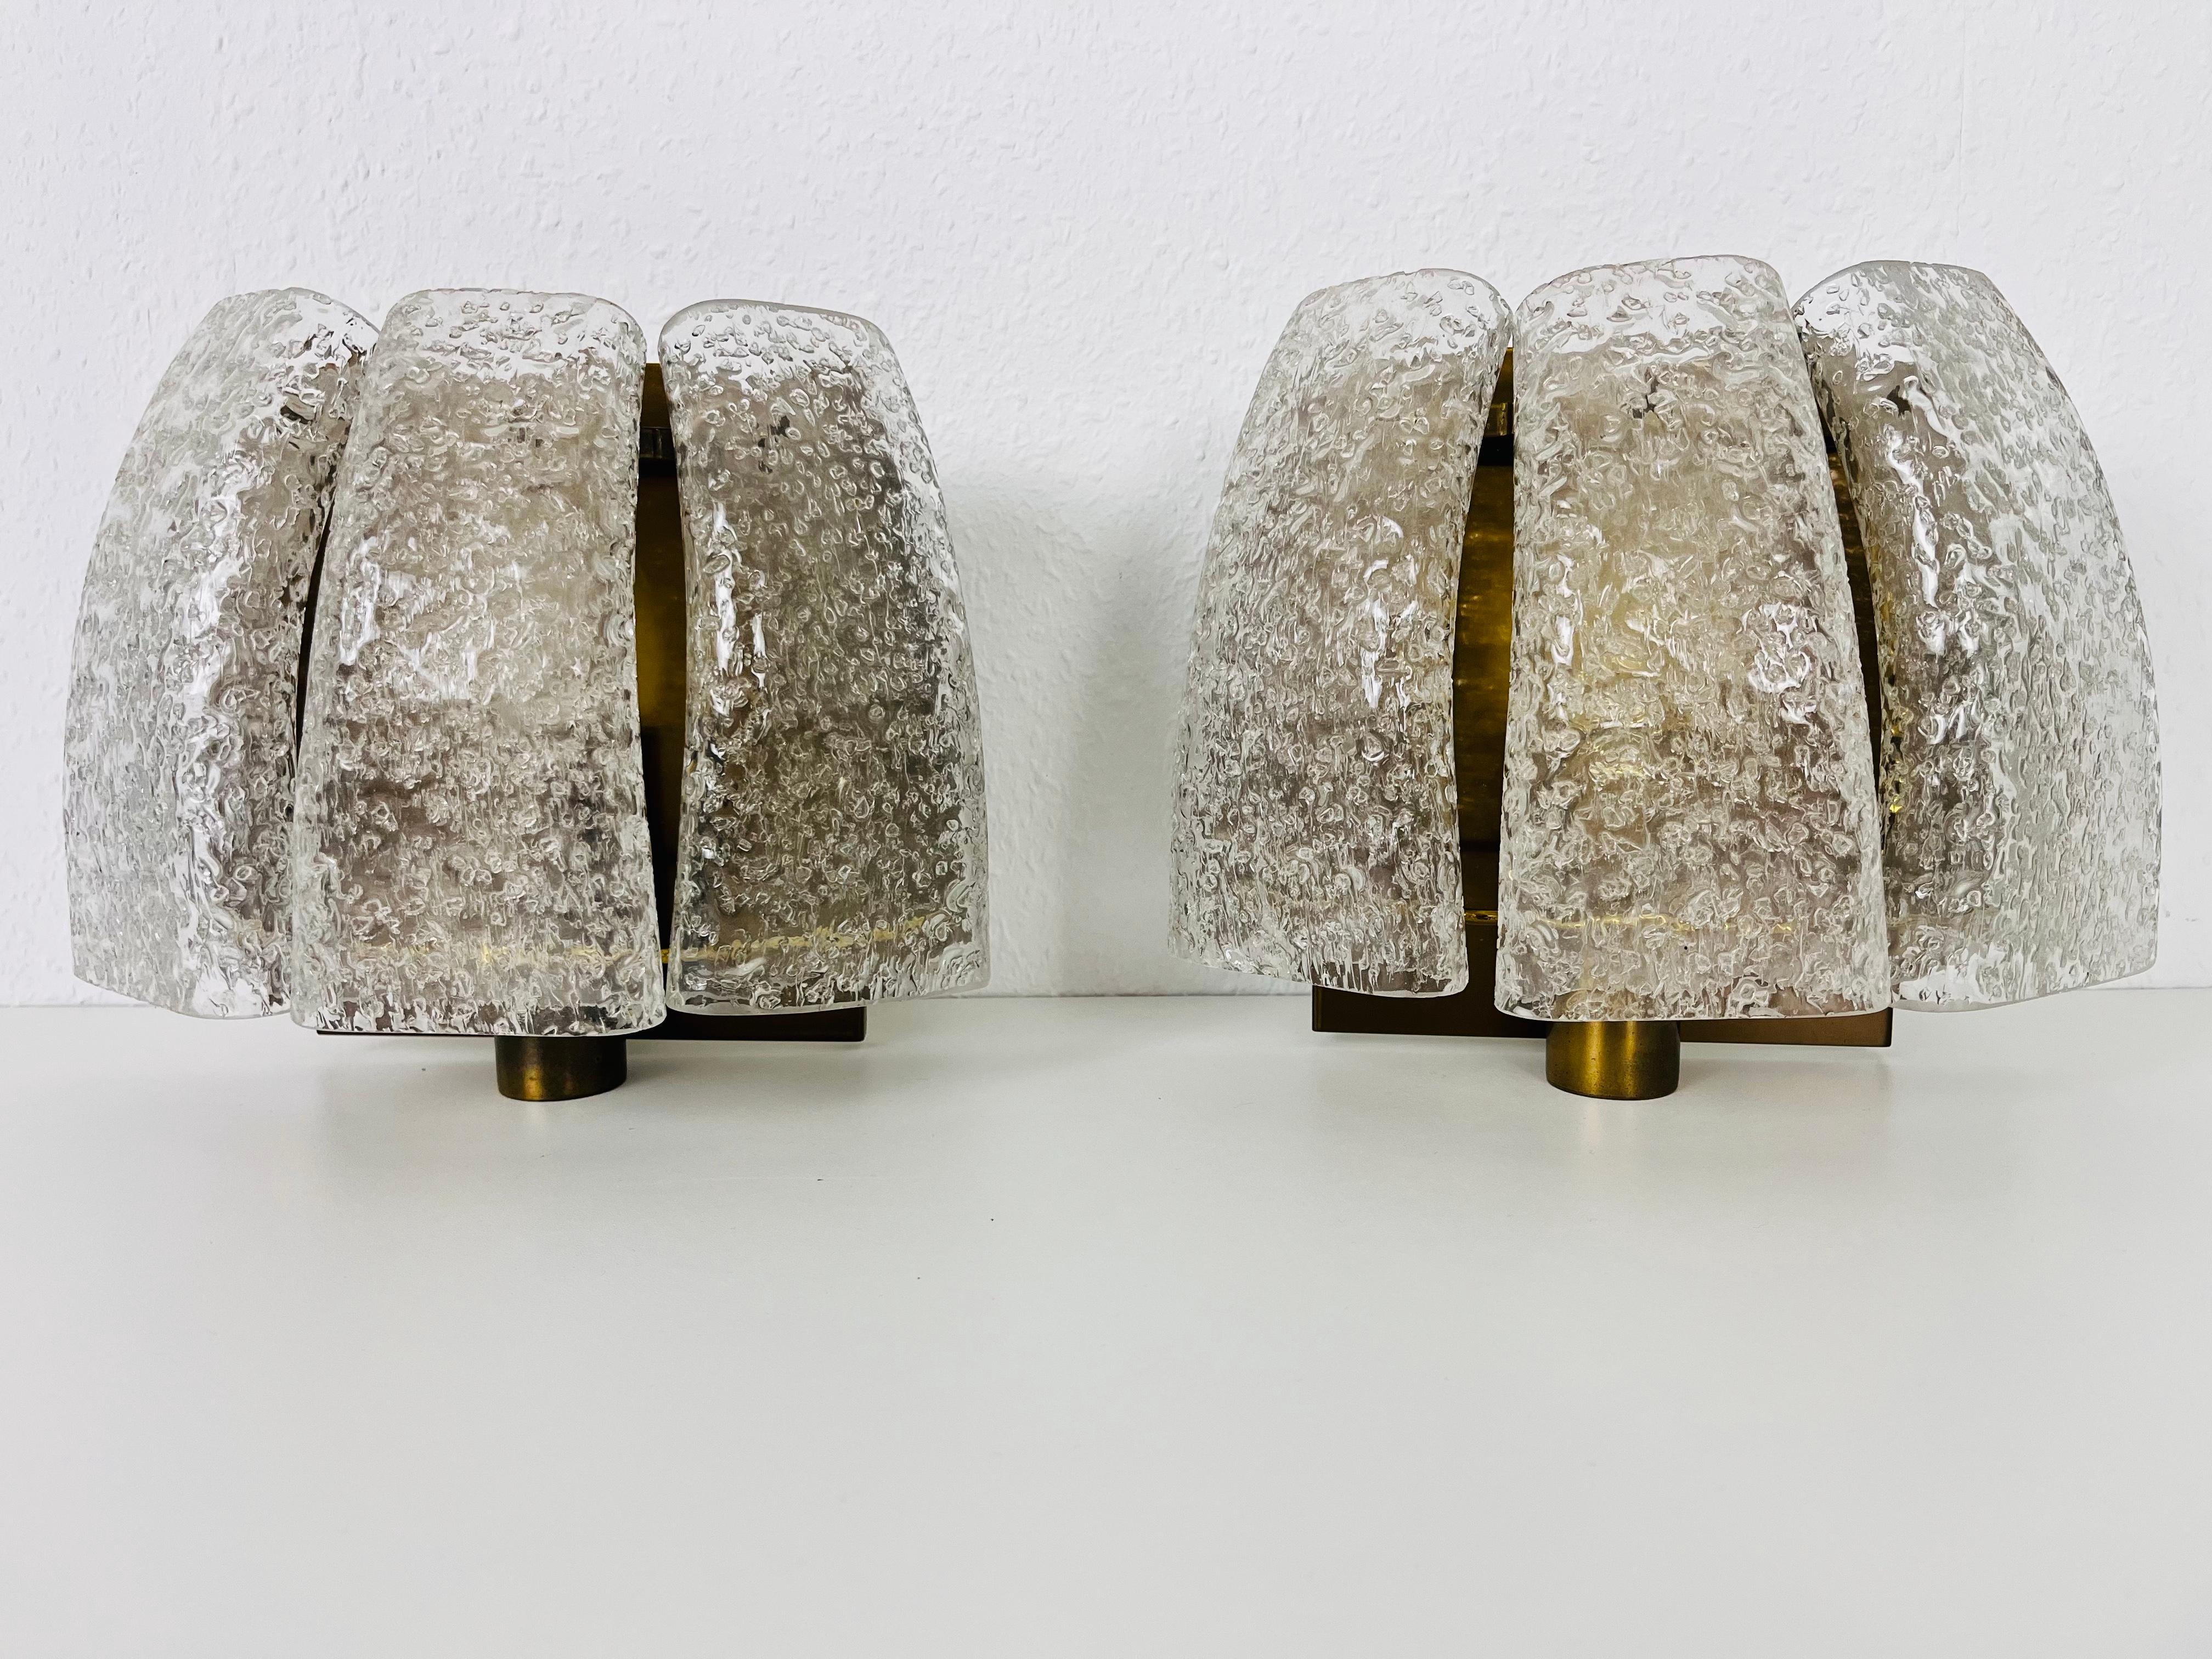 Midcentury pair of beautiful wall lights by the German manufacturer Doria made in the 1960s. The unique glass elements are made from Murano glass.

The lightings require E14 light bulbs. Works with both 120/220V. Very good vintage